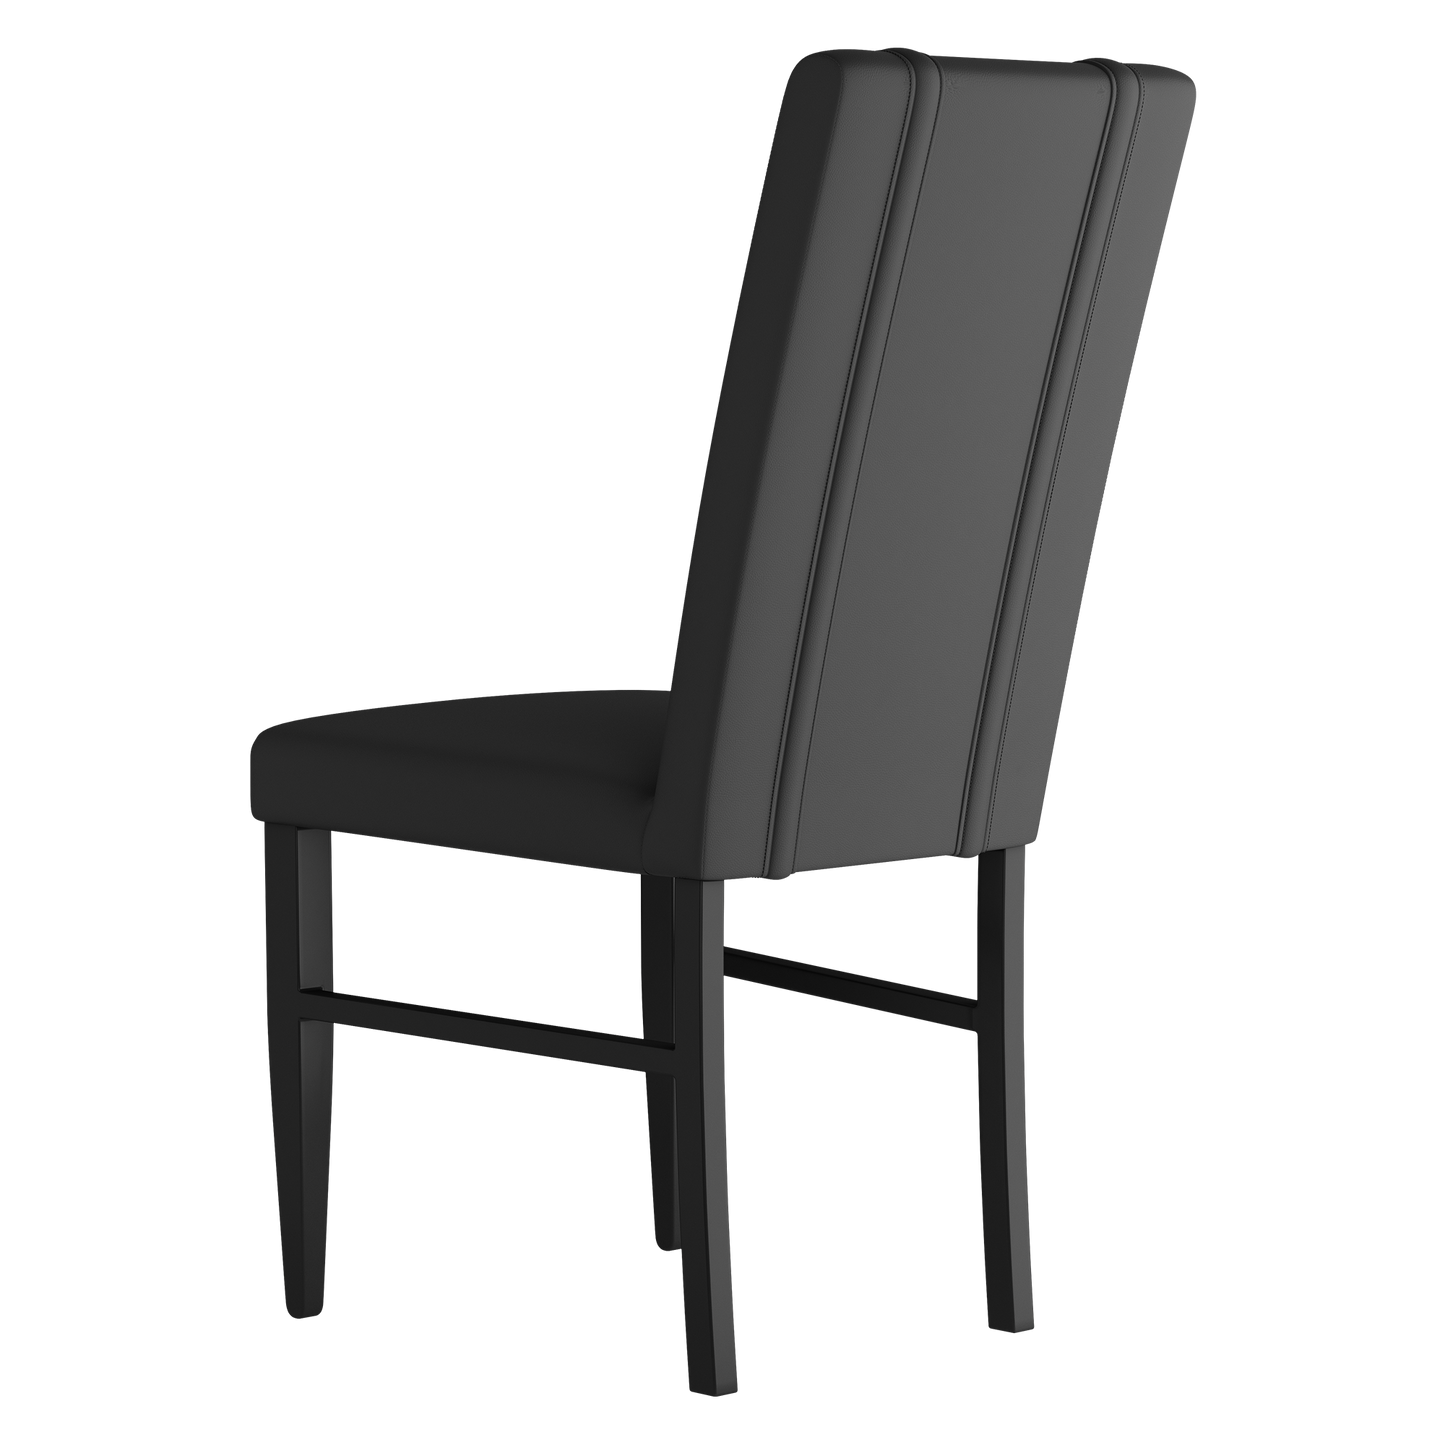 Side Chair 2000 with Michigan State Secondary Logo Set of 2